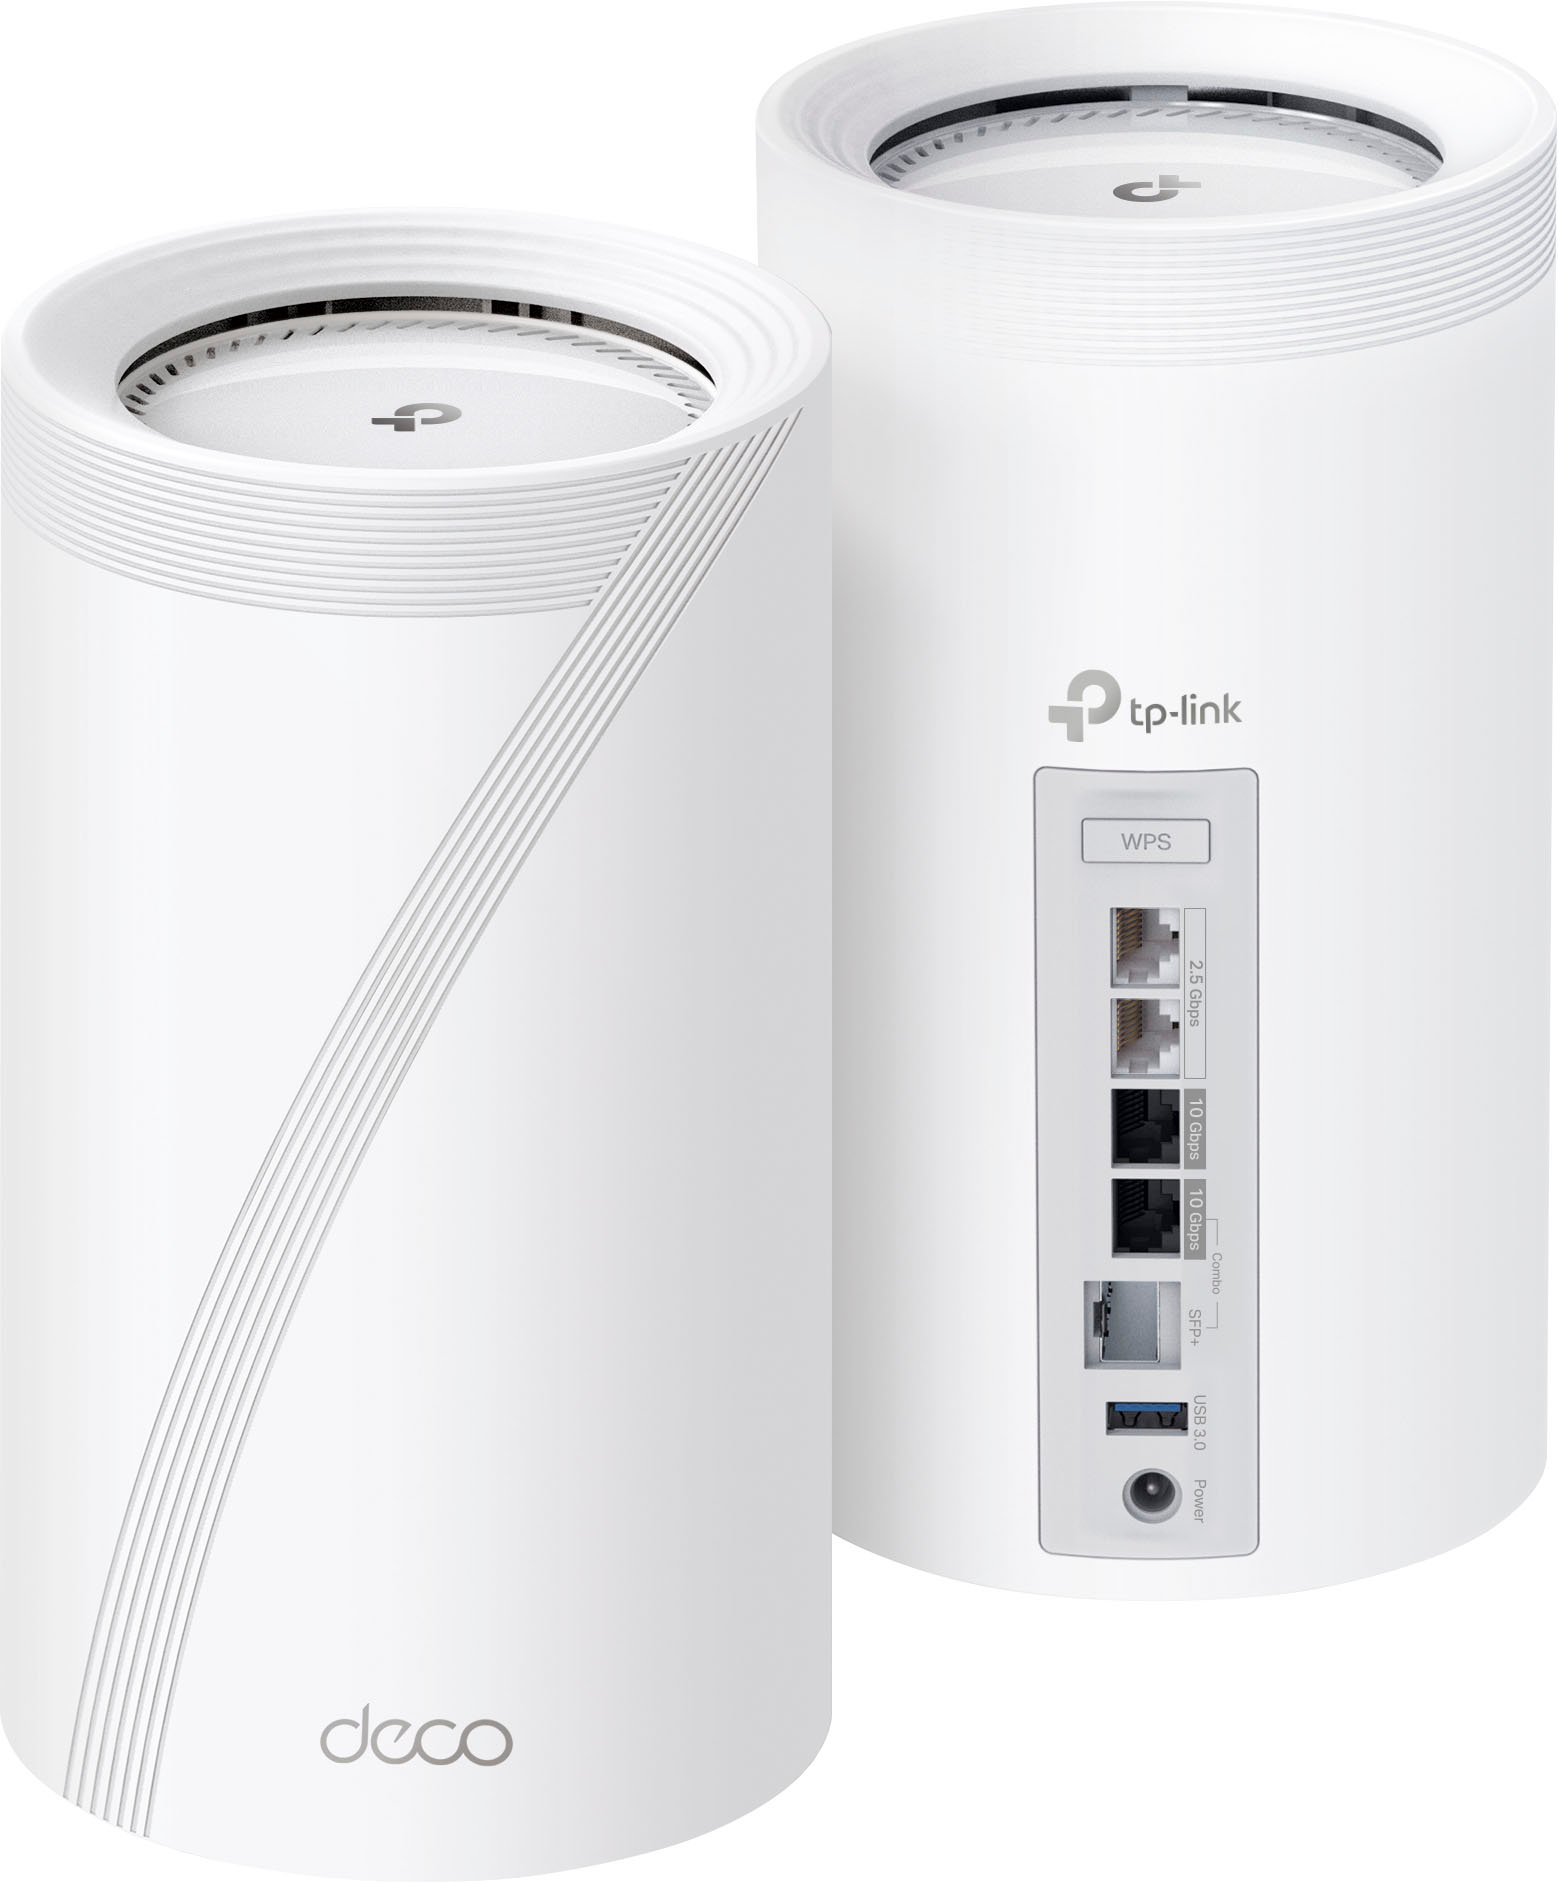 How To: Setup the TP-Link Deco Mesh WiFi System 